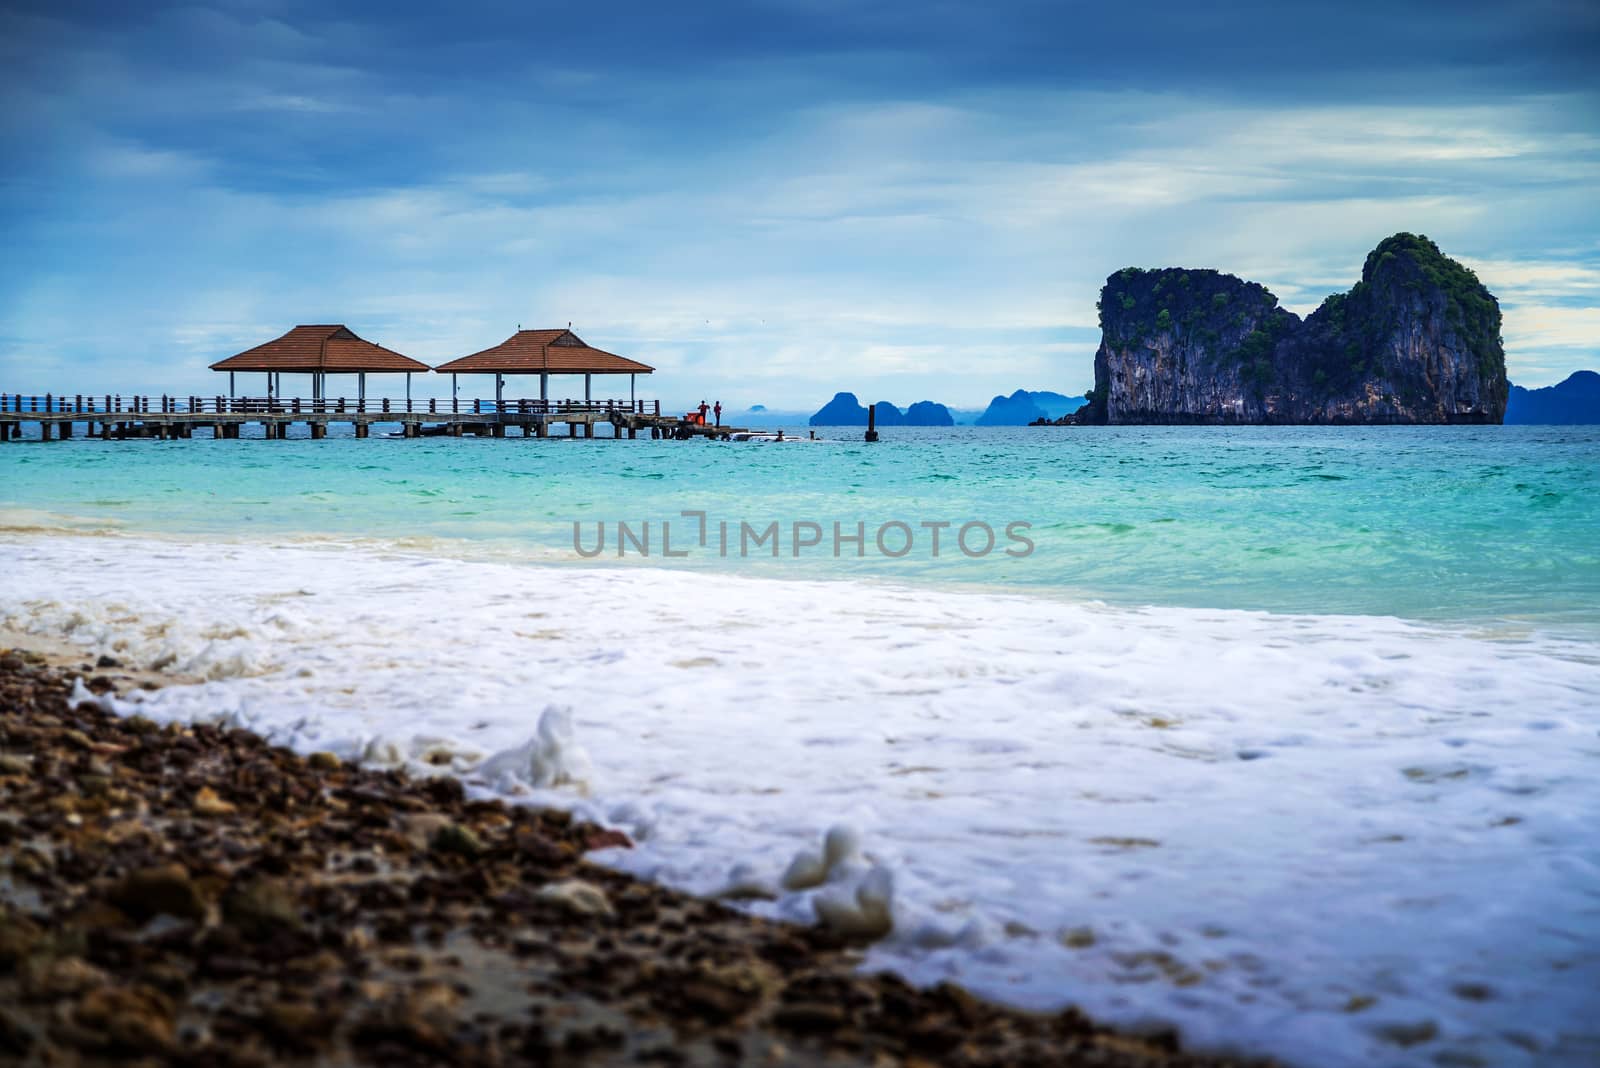 Andaman sea View in Koh Ngai Island in Thailand by jakgree